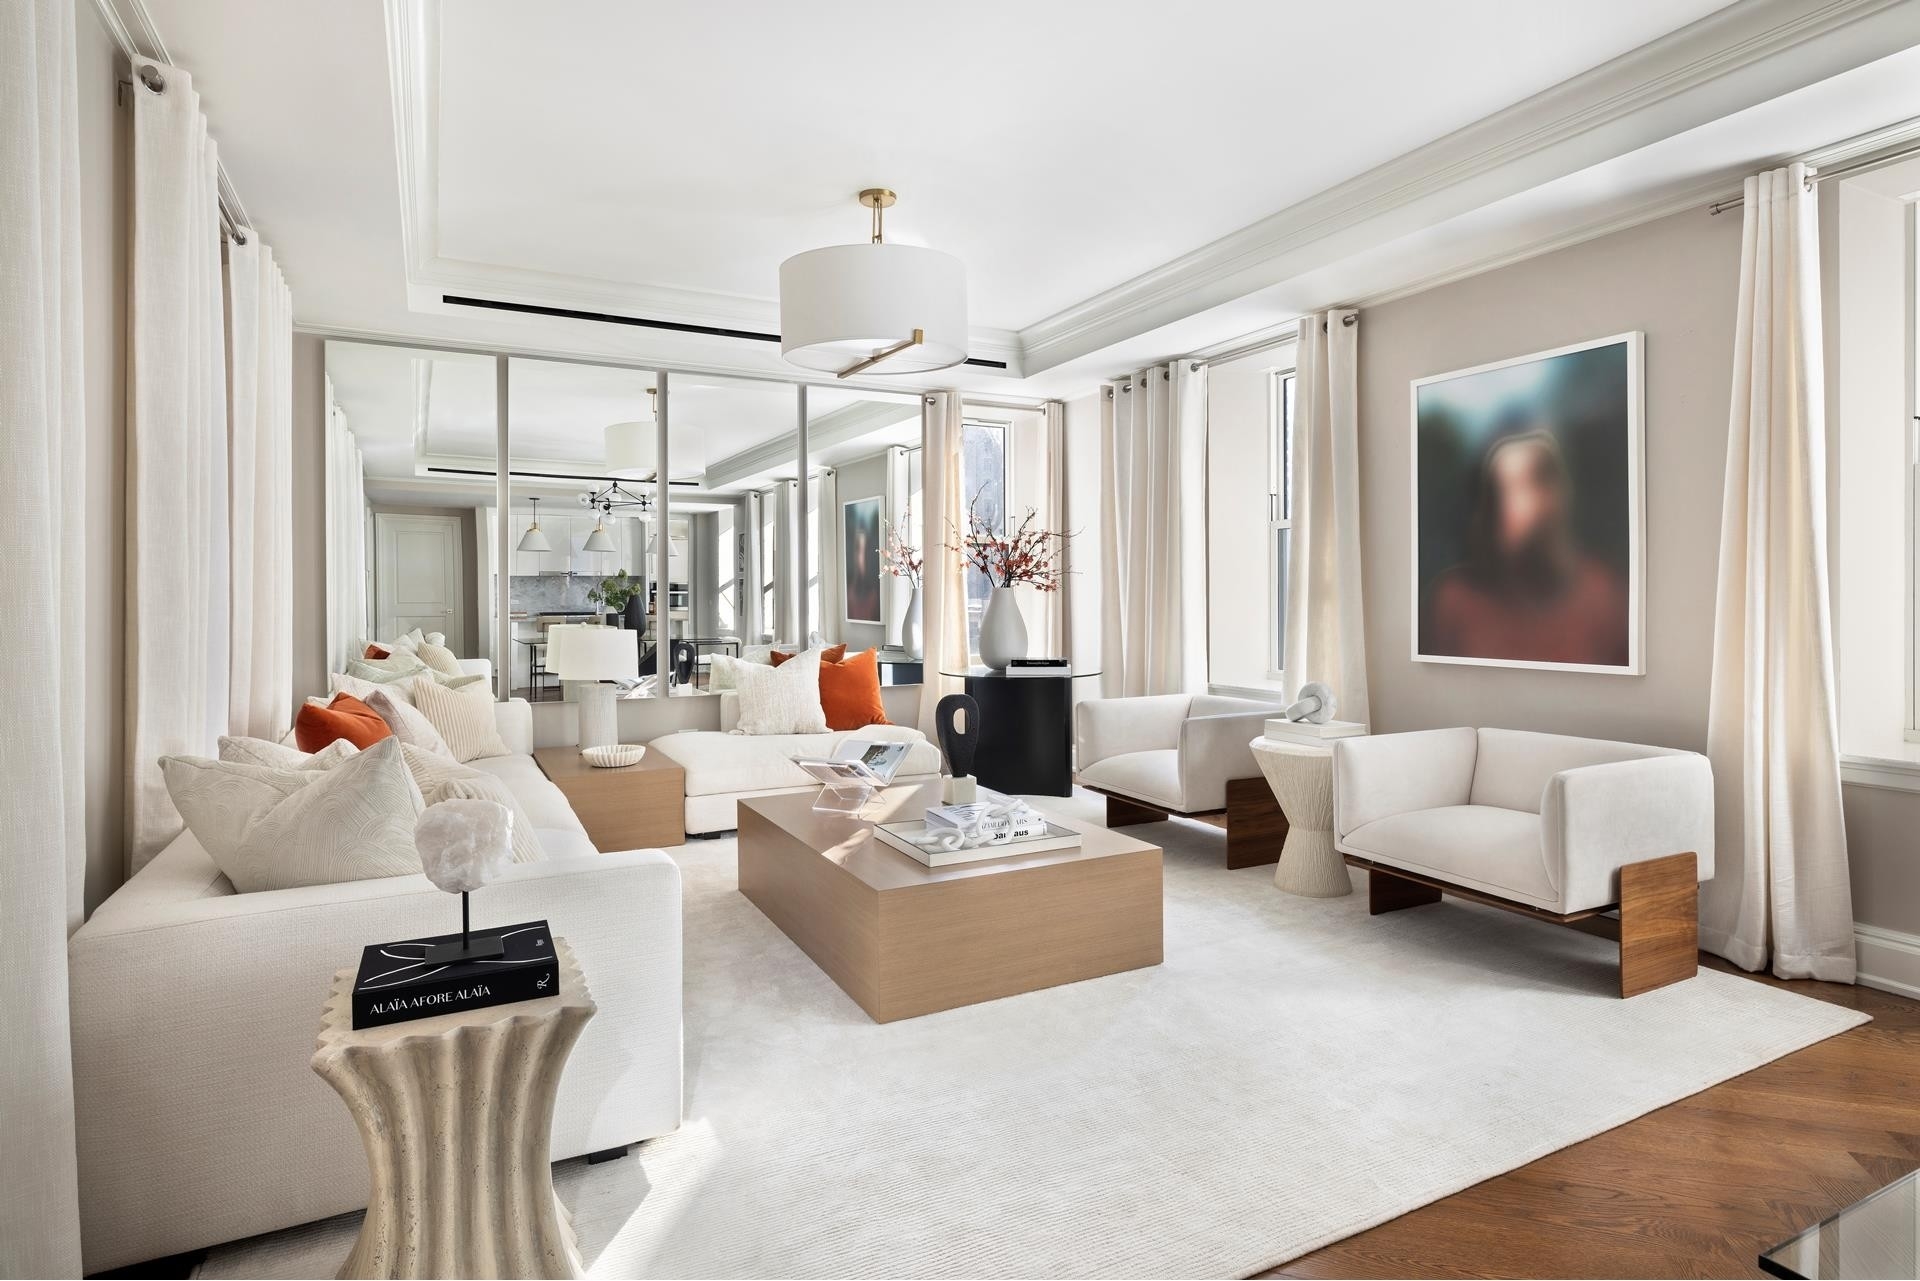 Property at The Chatsworth, 344 W 72ND ST, 609 Lincoln Square, New York, New York 10023